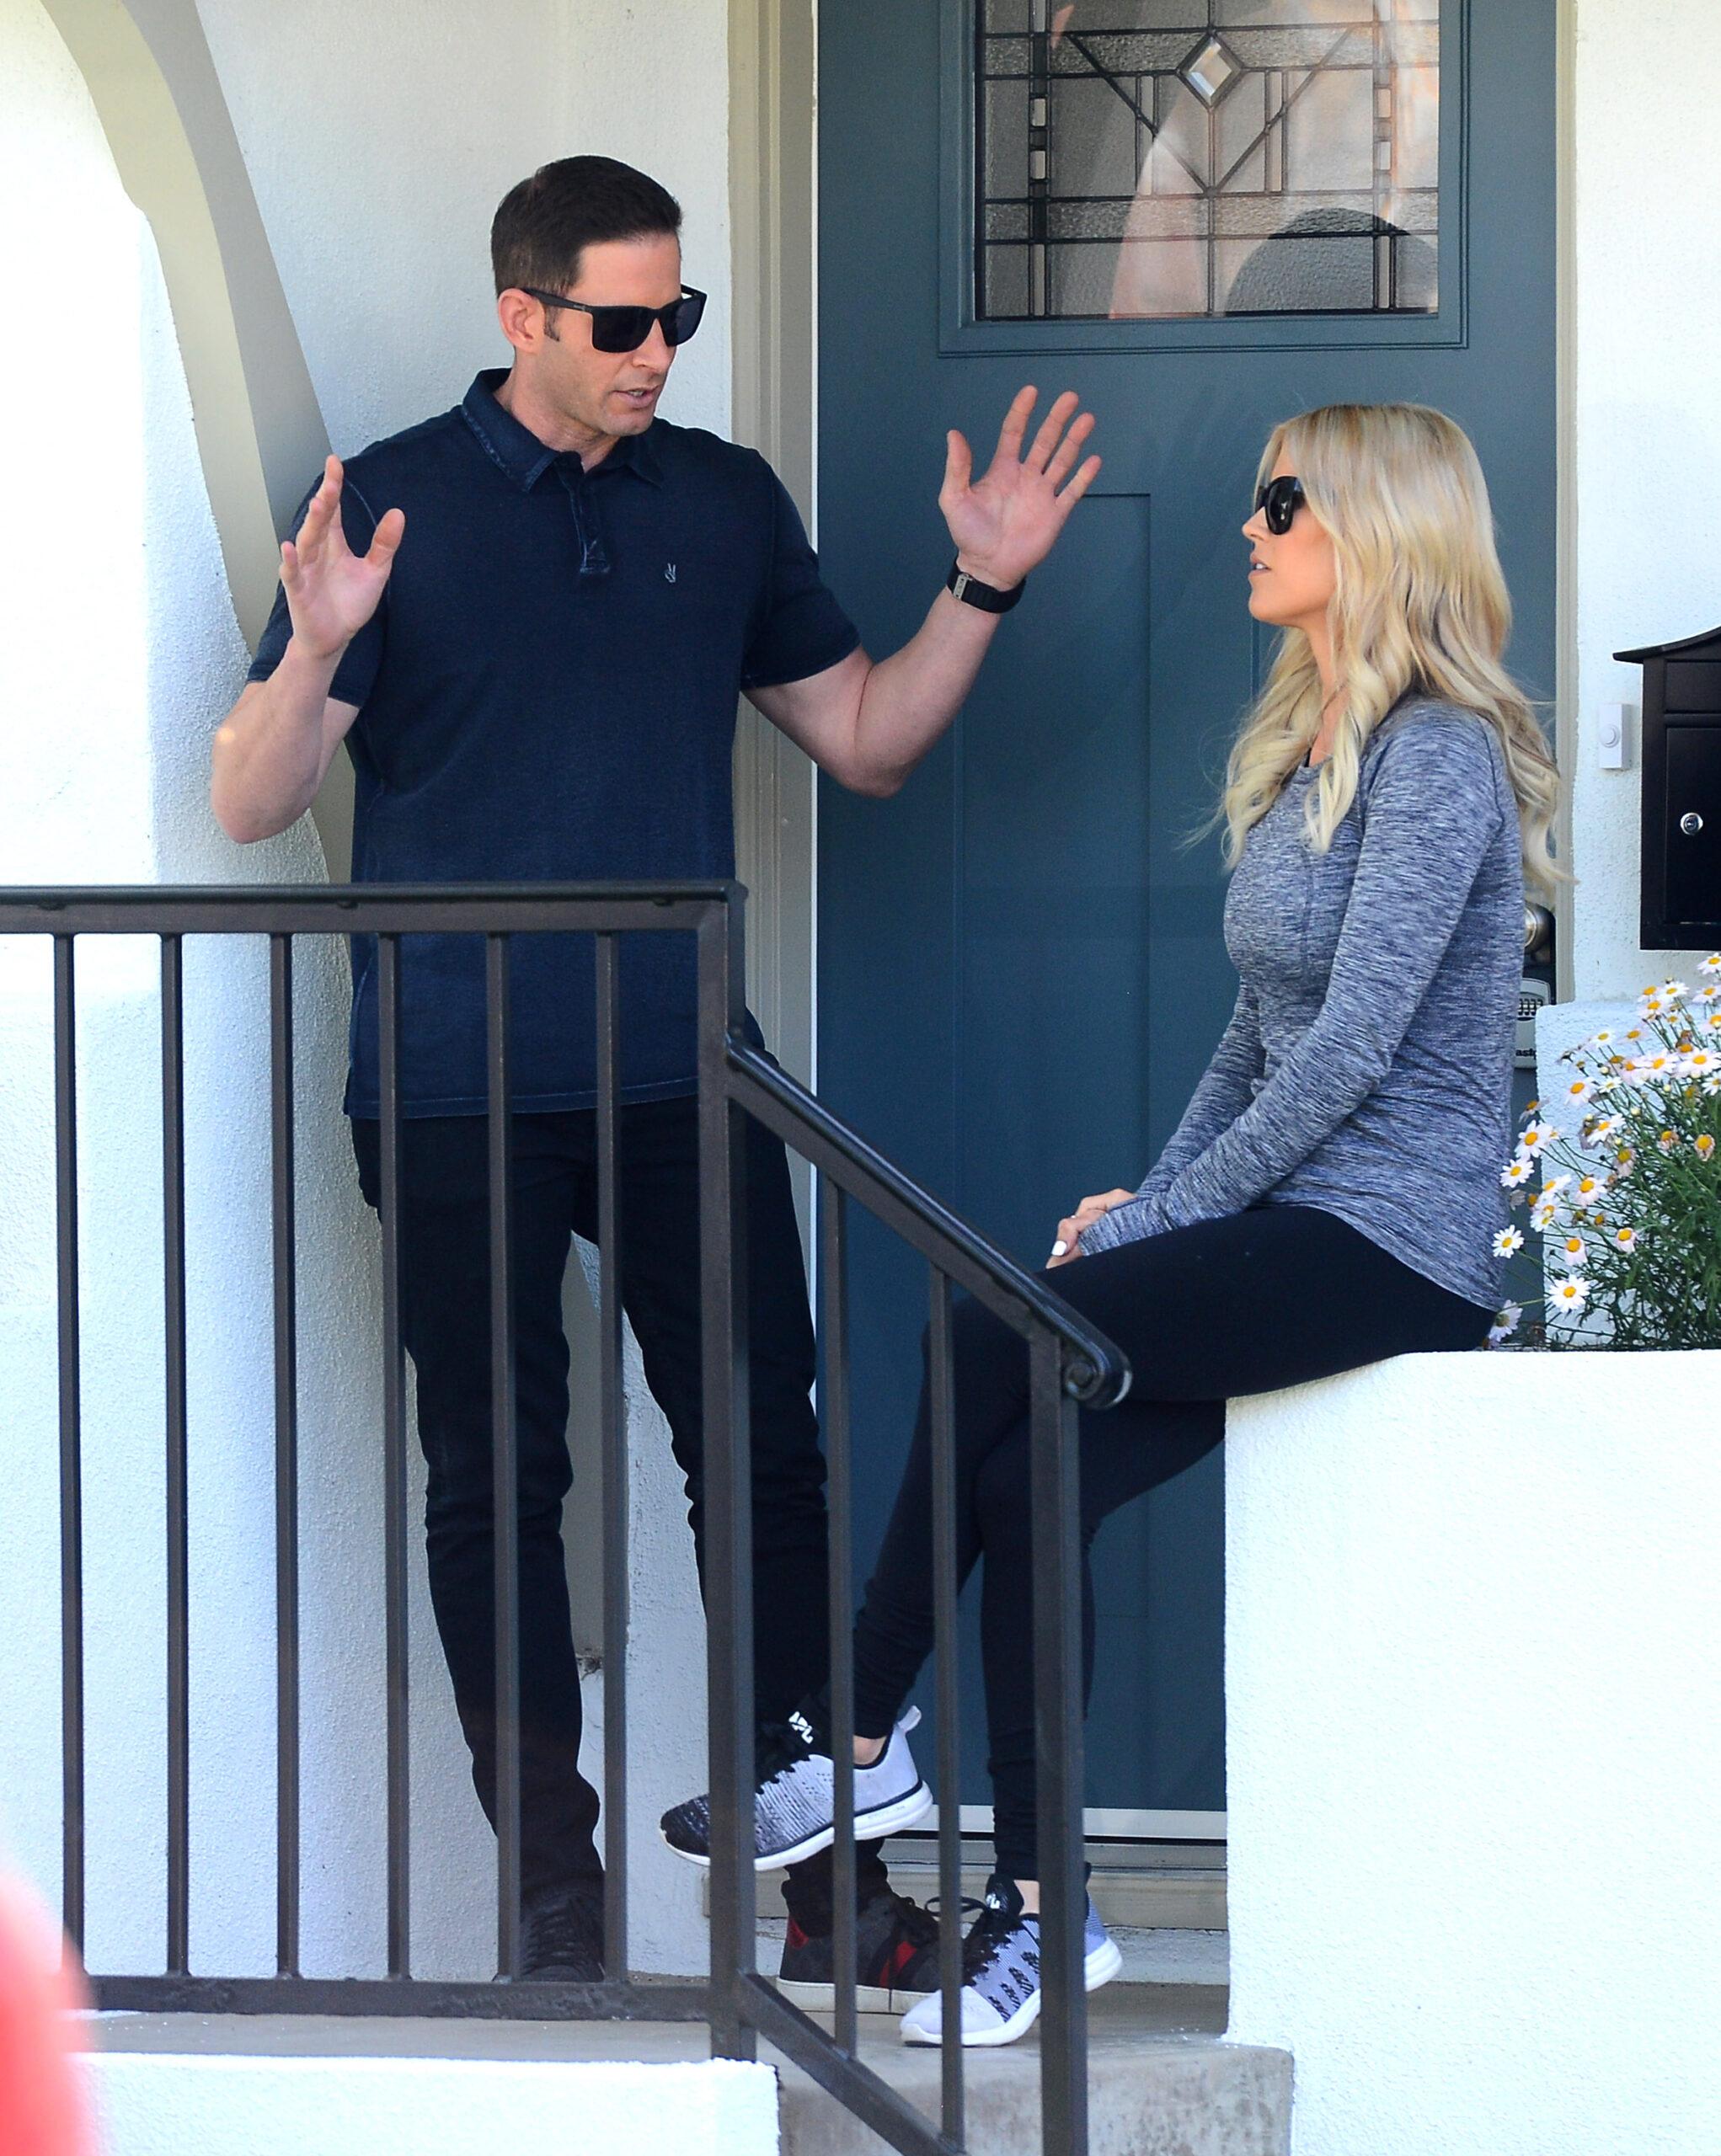 ‘Flip Or Flop’ Star Tarek El Moussa Gets COVID-19, Shuts Down TWO Reality Shows!